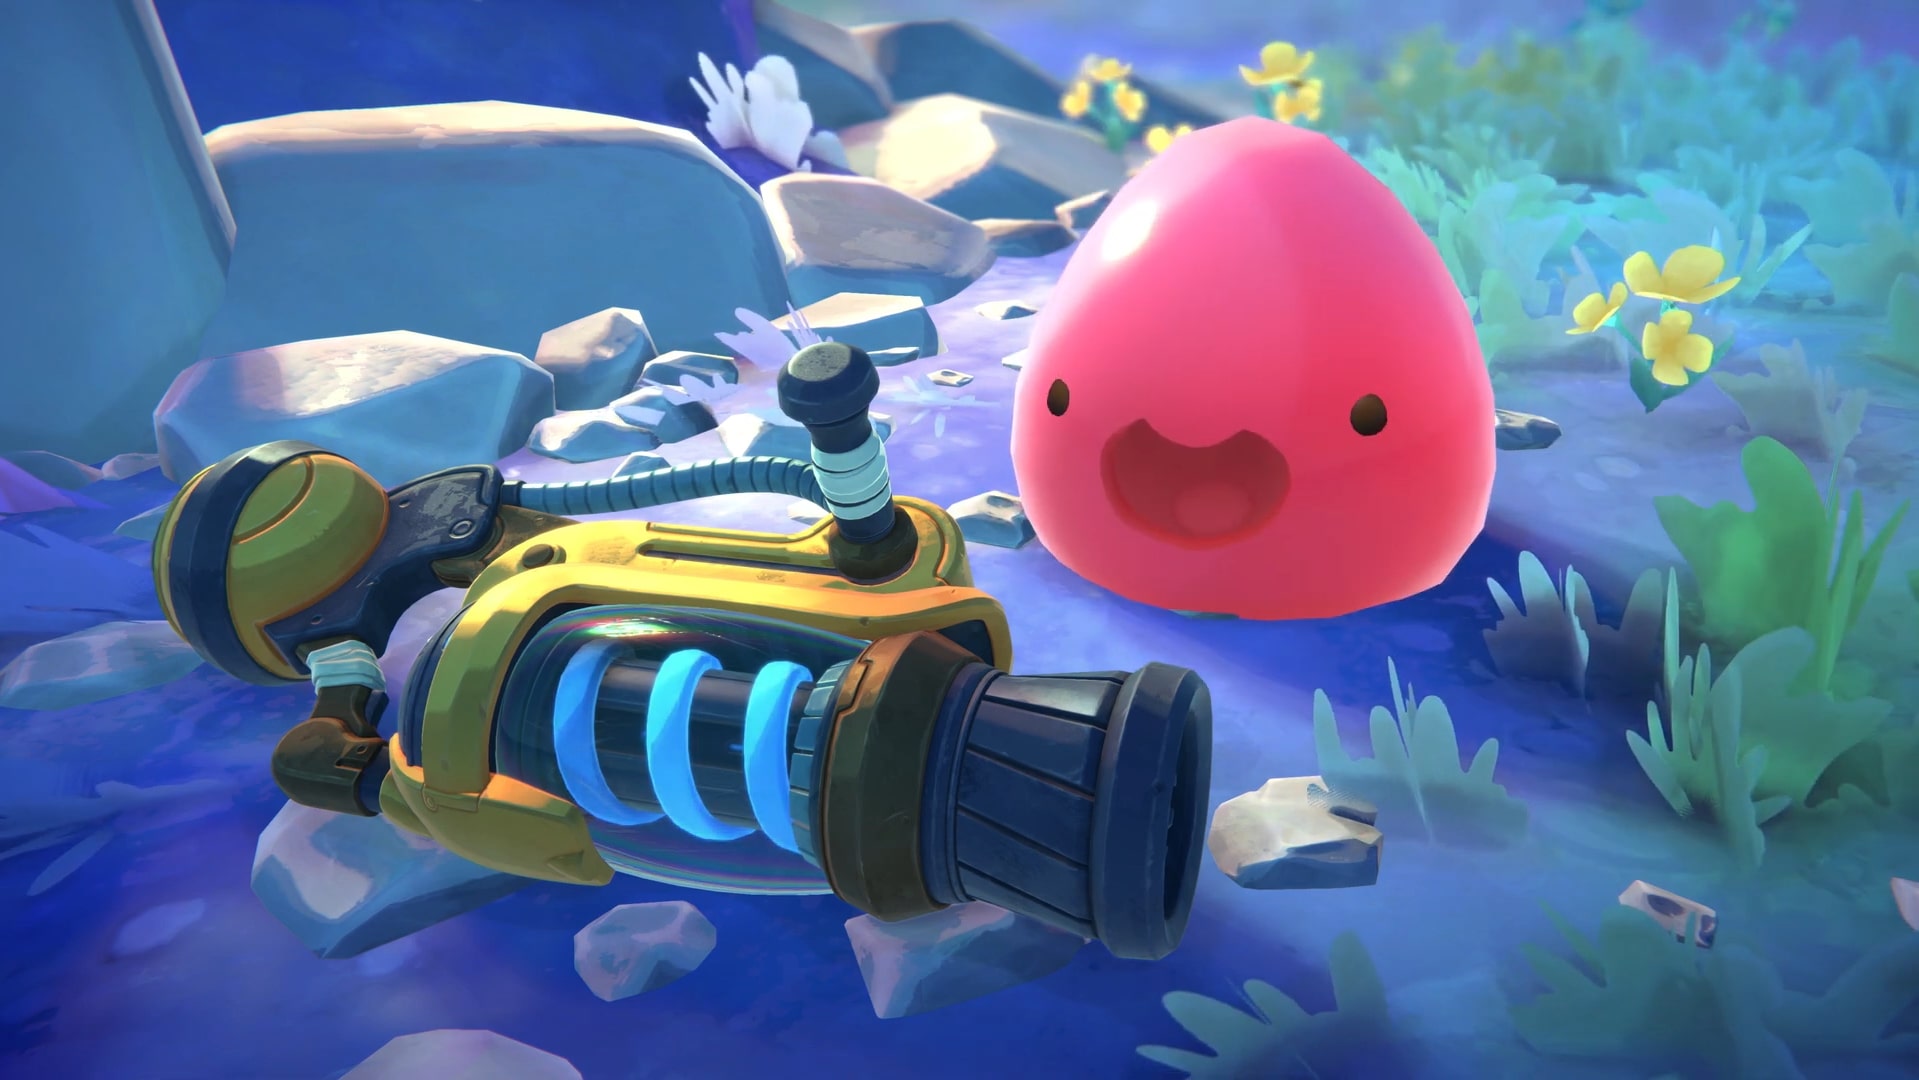 Slime Rancher Movie in the Works from John Wick Creator - The